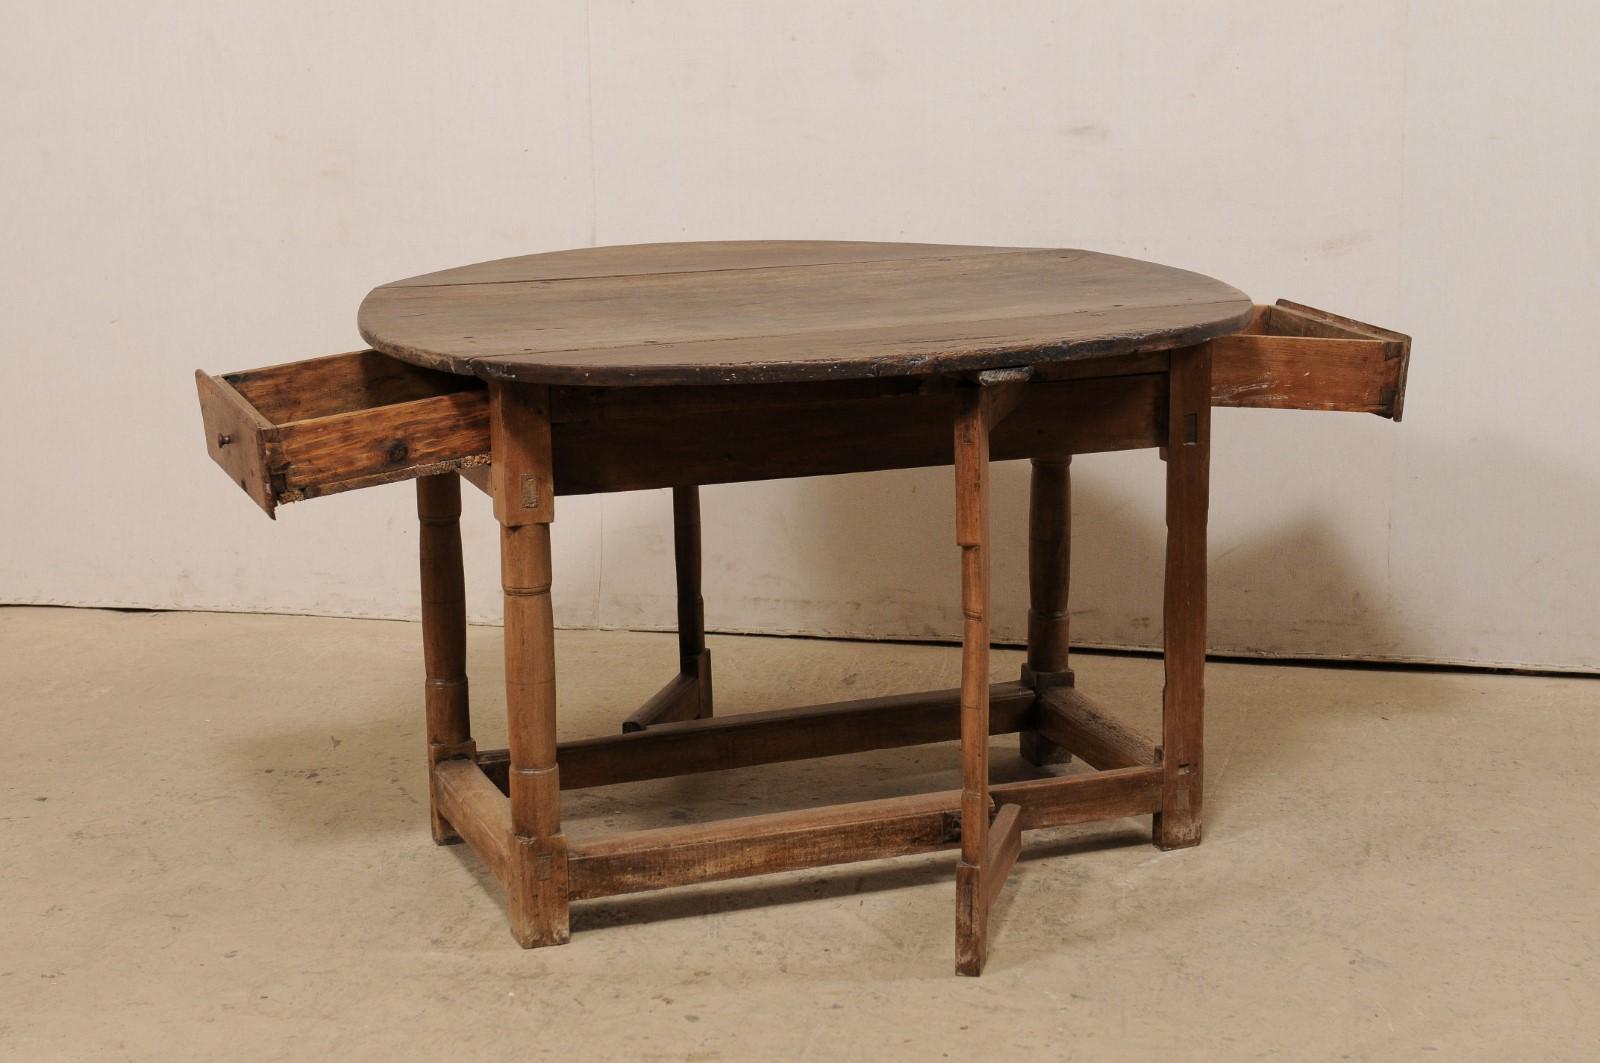 19th Century Italian Double Gate-Leg Table w/Drop Leaves on Either Side, Turn of 18th/19th C. For Sale